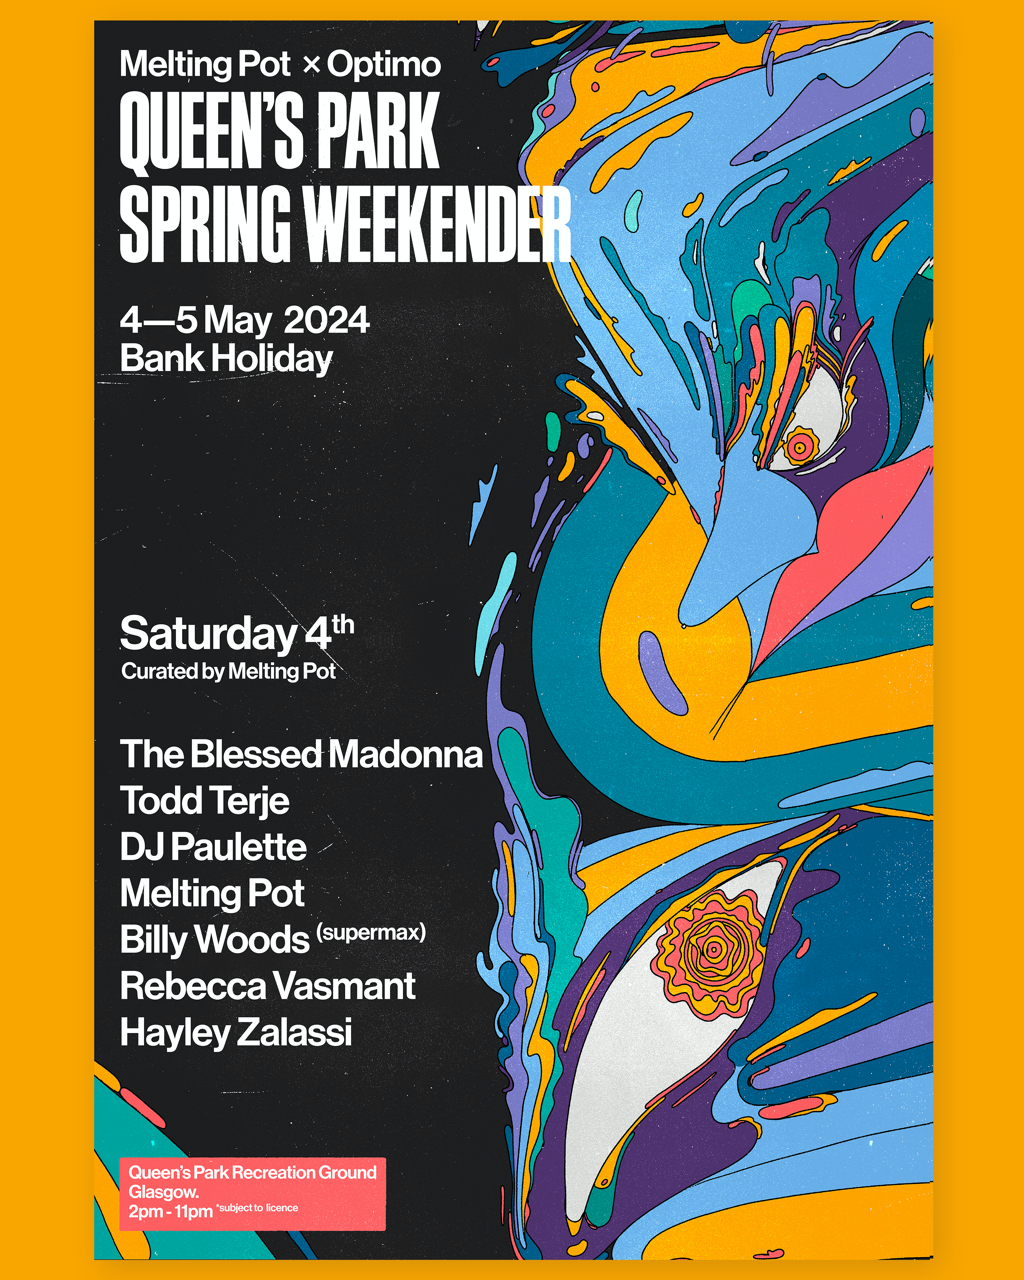 Queen's Park Spring Weekender '24 by Melting Pot & Optimo // Sat 4th & Sun 5th of May - Página trasera